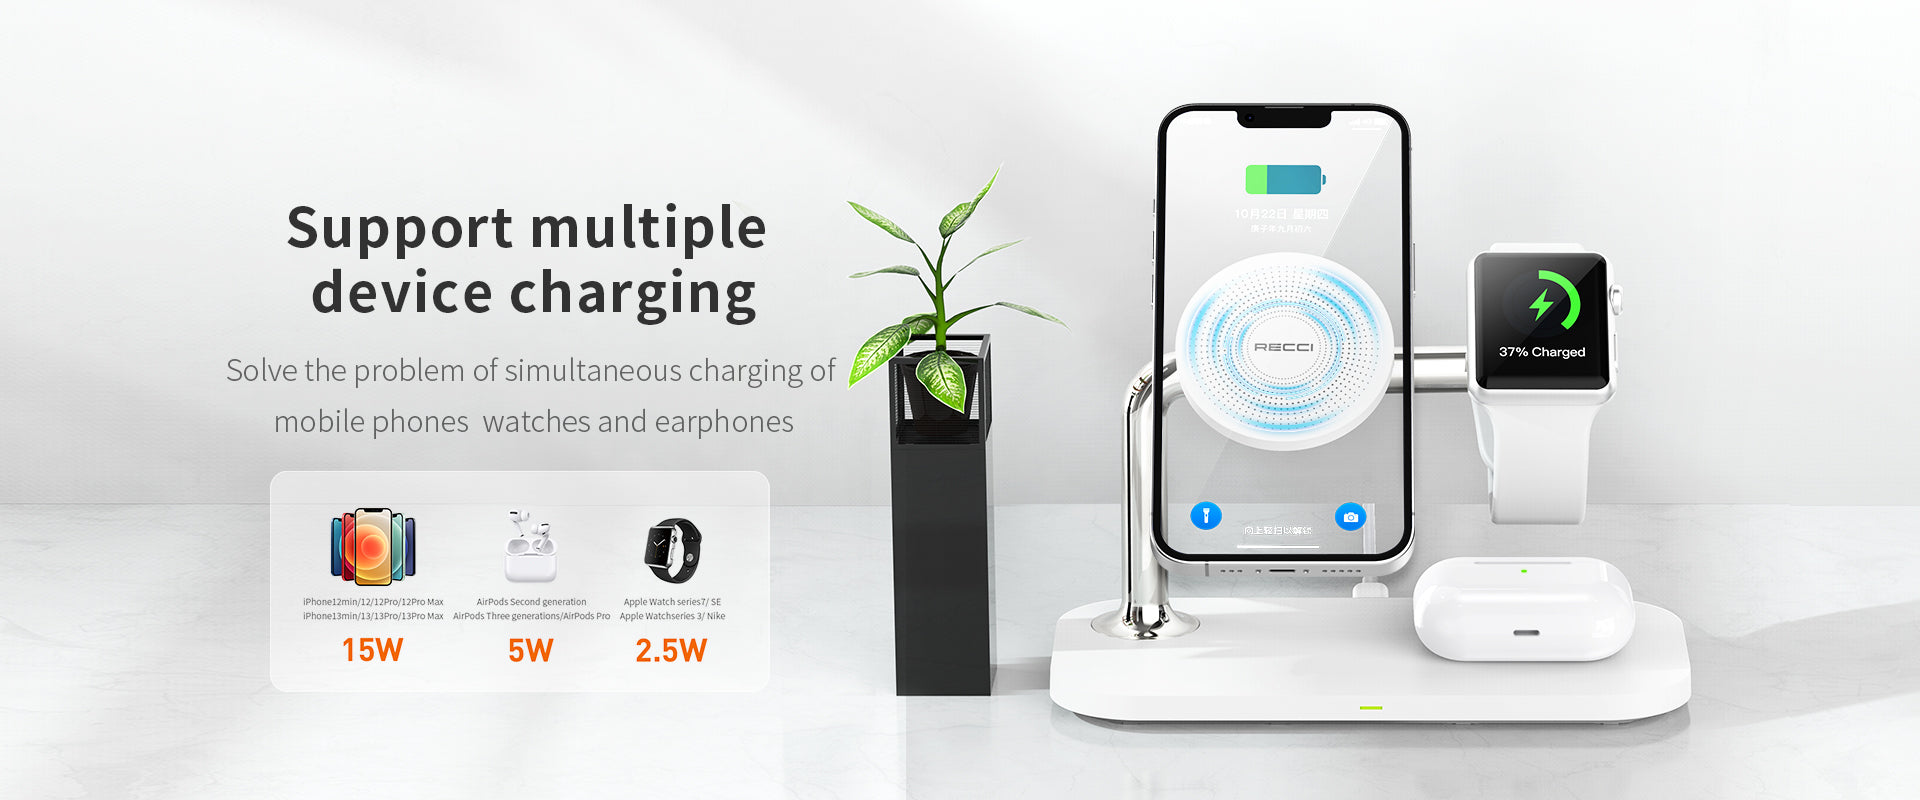 RCW-20 Wireless Charger 3 in 1magnetic suction wireless charging